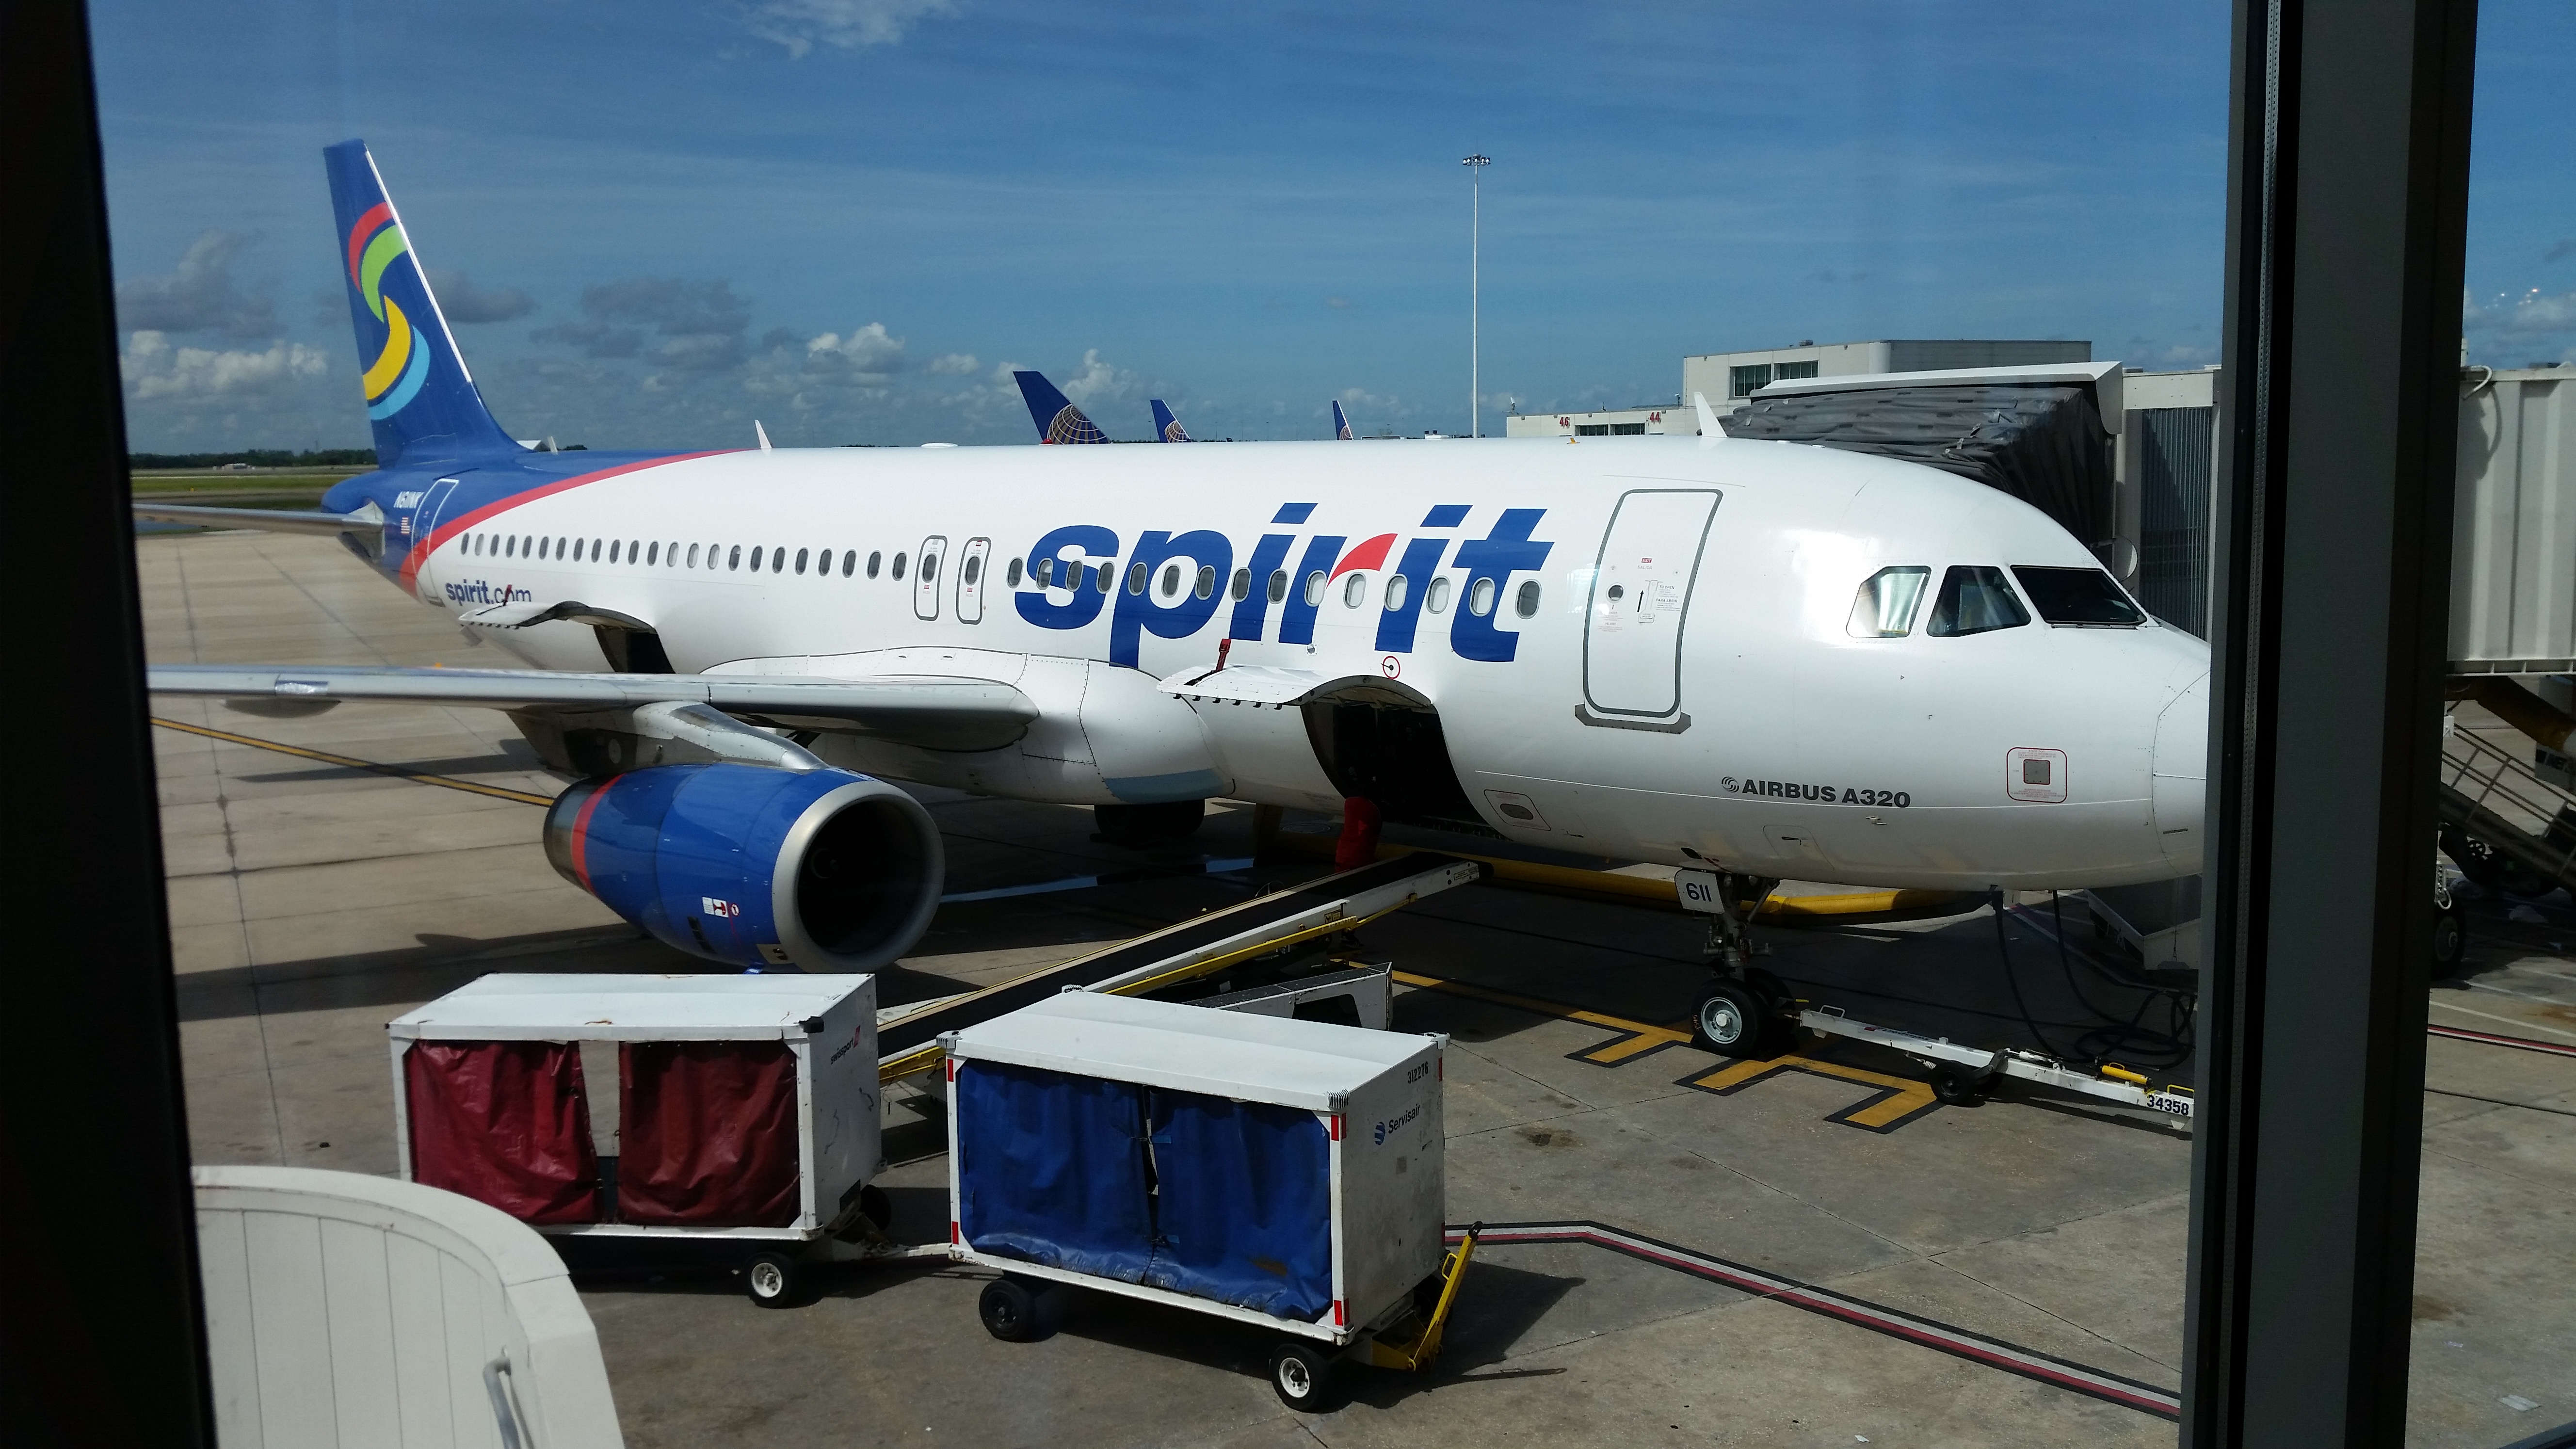 Spirit airlines is having a fucked up week